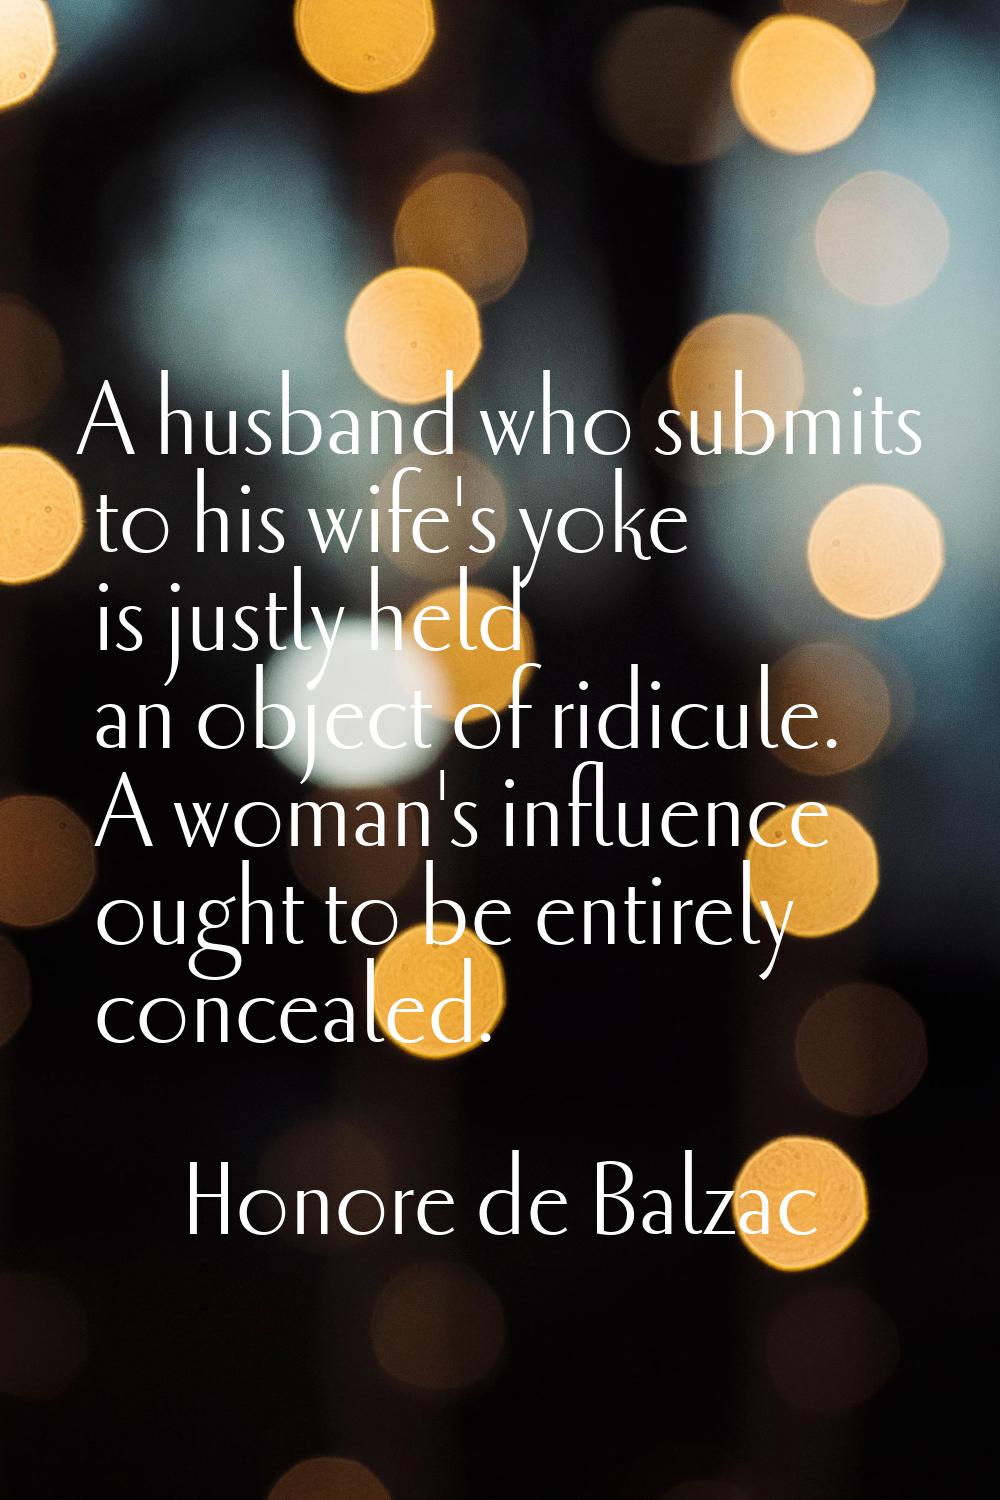 A husband who submits to his wife's yoke is justly held an object of ridicule. A woman's influence 